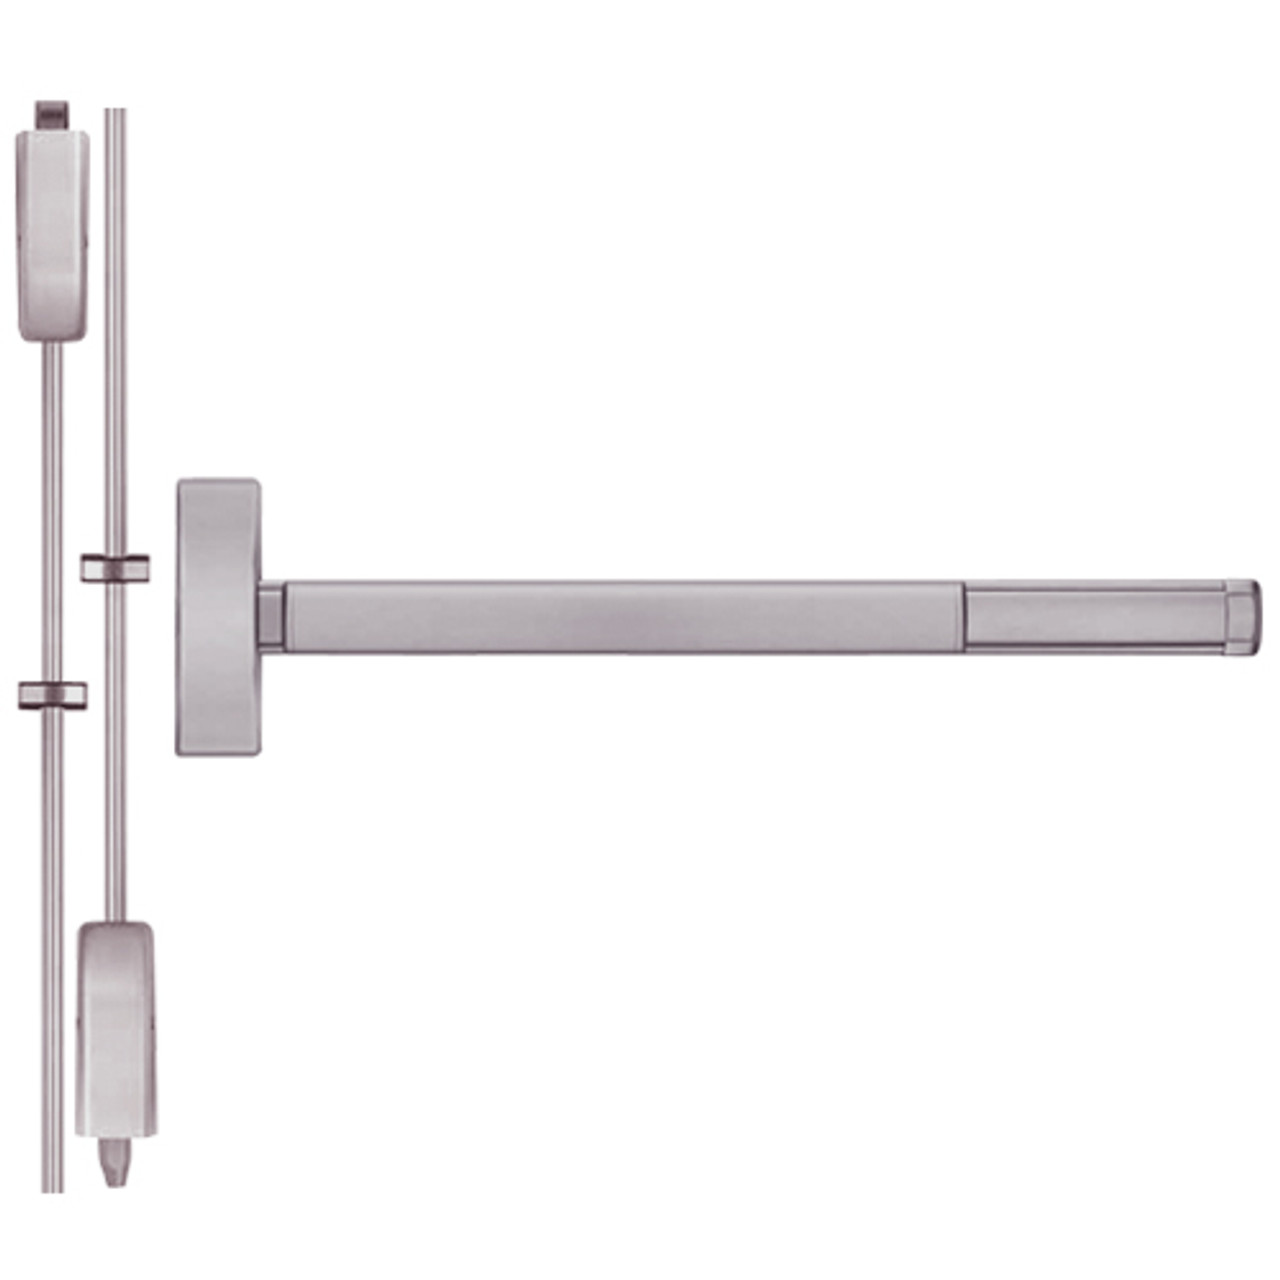 TS2215-630-48 PHI 2200 Series Non Fire Rated Apex Surface Vertical Rod Device with Touchbar Monitoring Switch Prepped for Thumb Piece Always Active in Satin Stainless Steel Finish